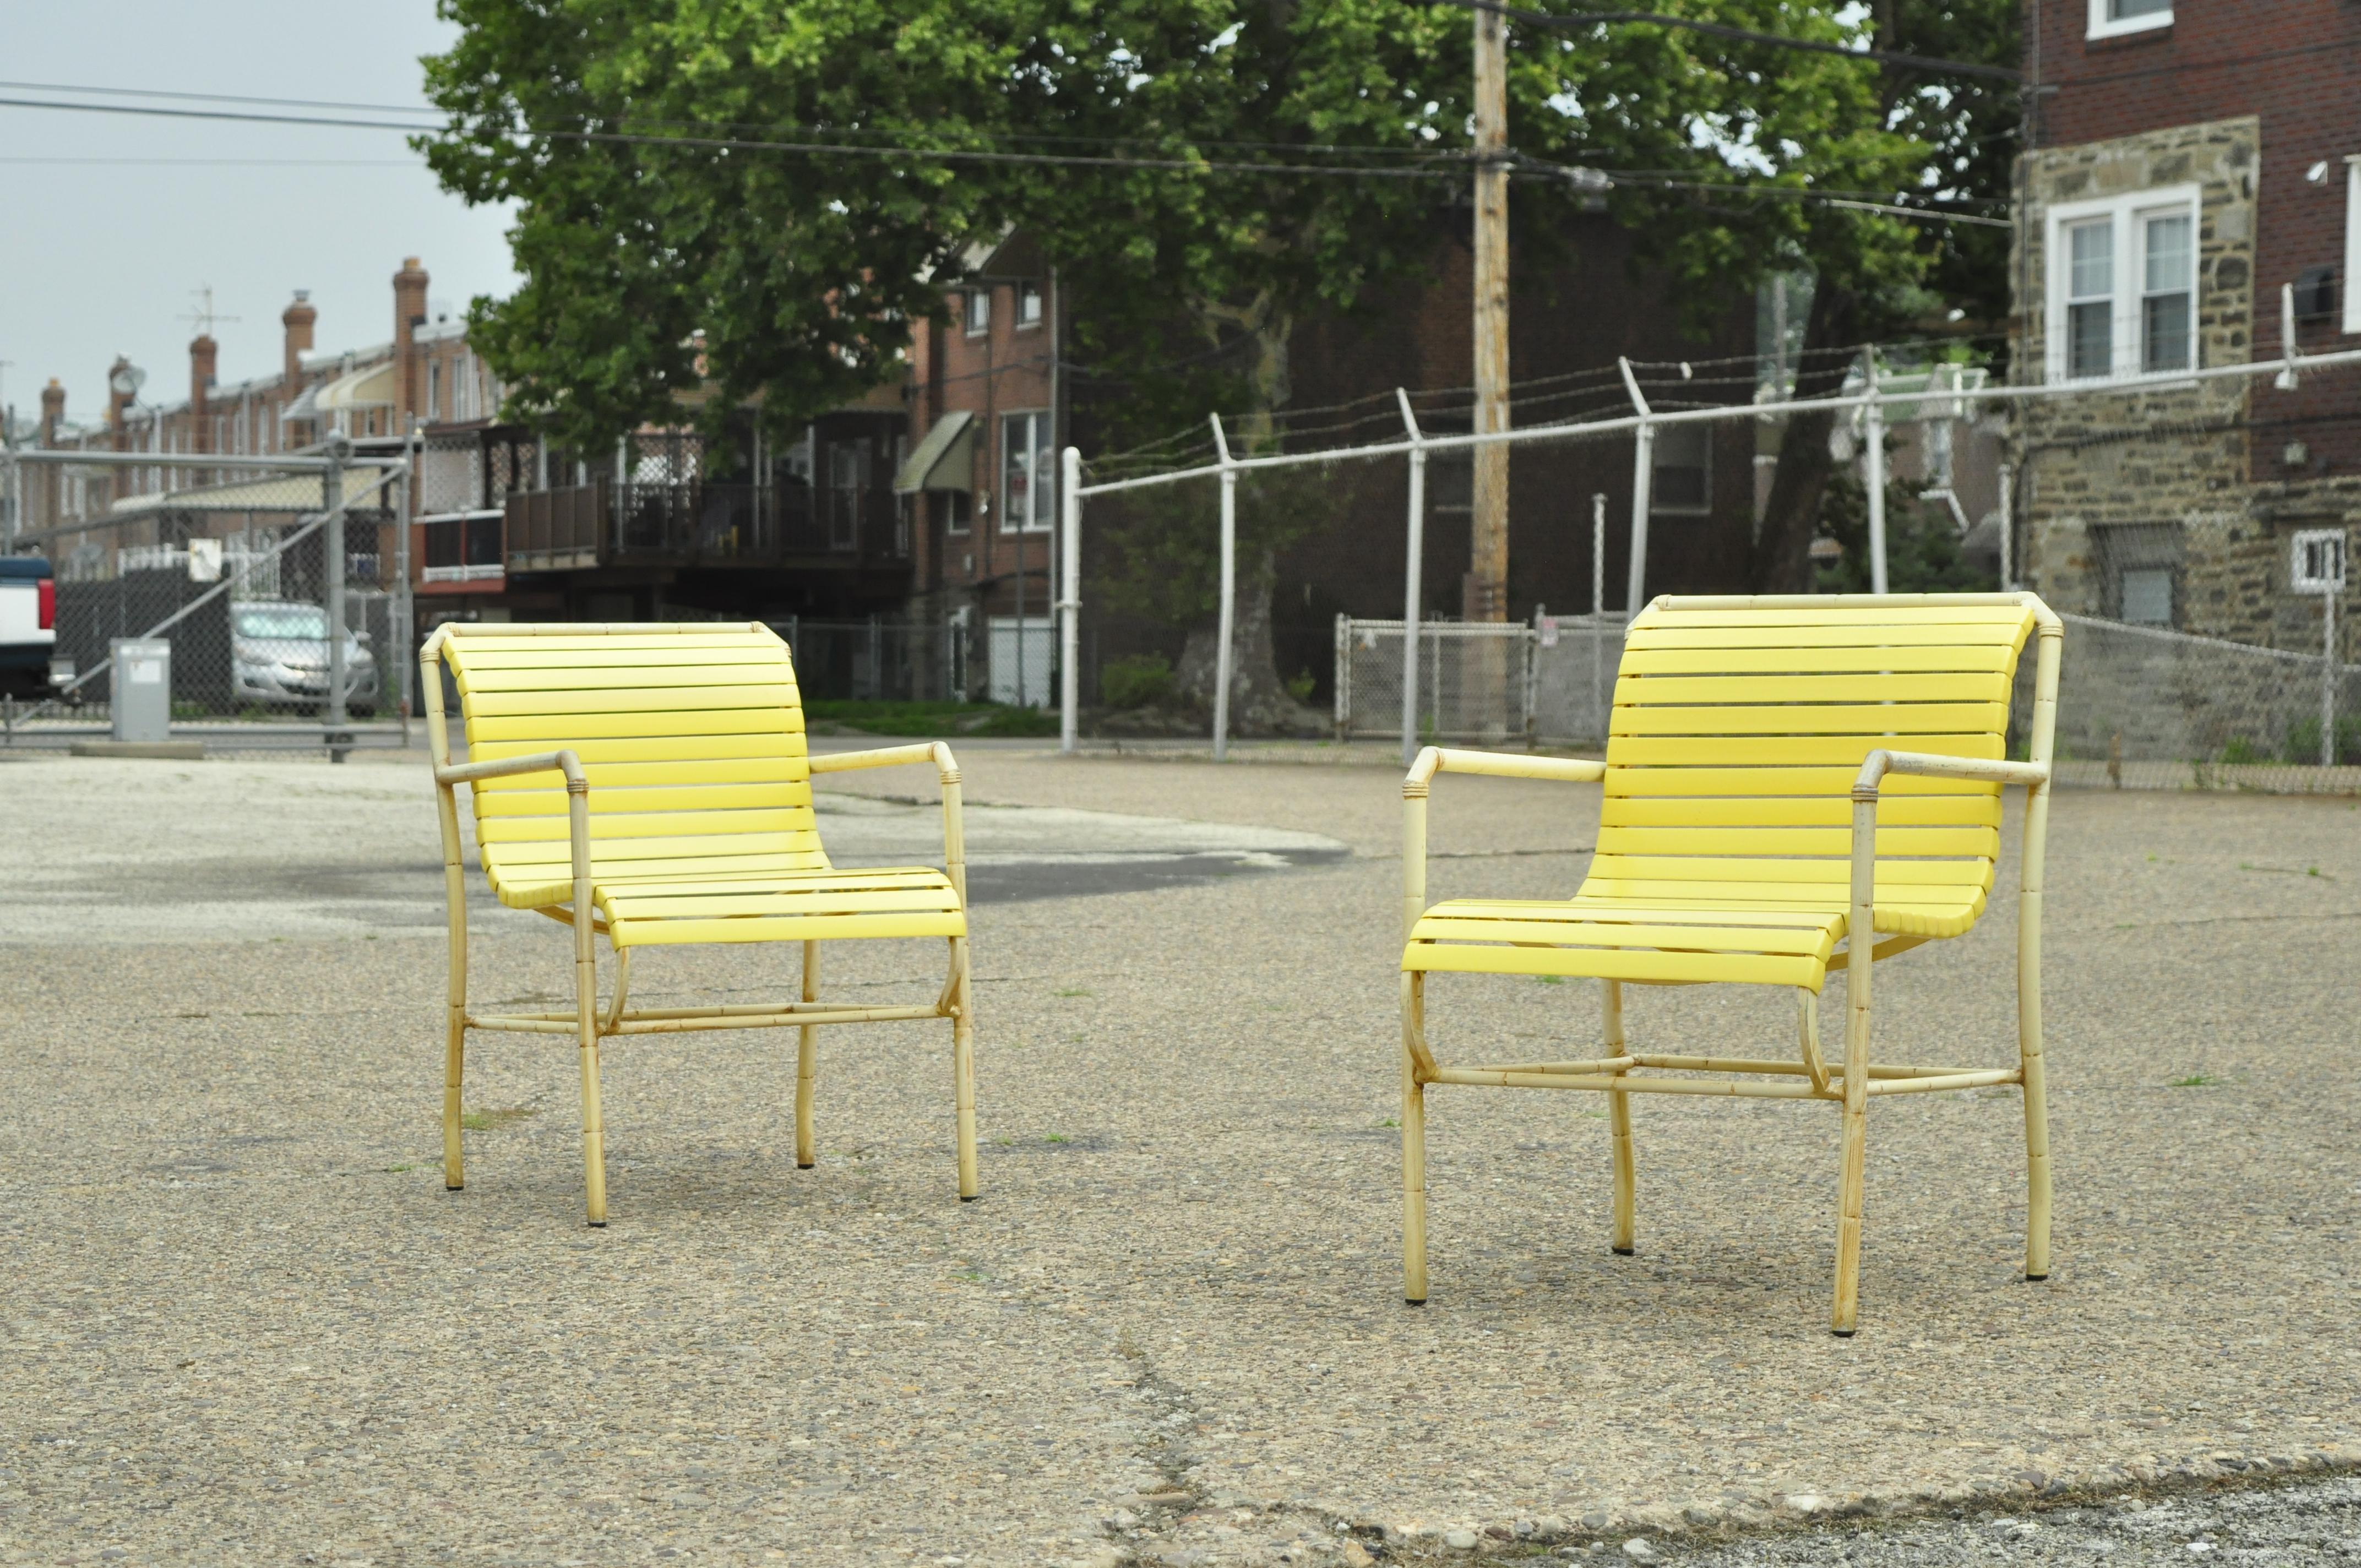 Vintage faux bamboo aluminum yellow hauser pool patio dining chairs - Set or 4. Set includes (4) arm chairs, yellow vinyl straps, faux bamboo design metal frames, cast aluminum construction, quality craftsmanship. Unmarked but believed to be by